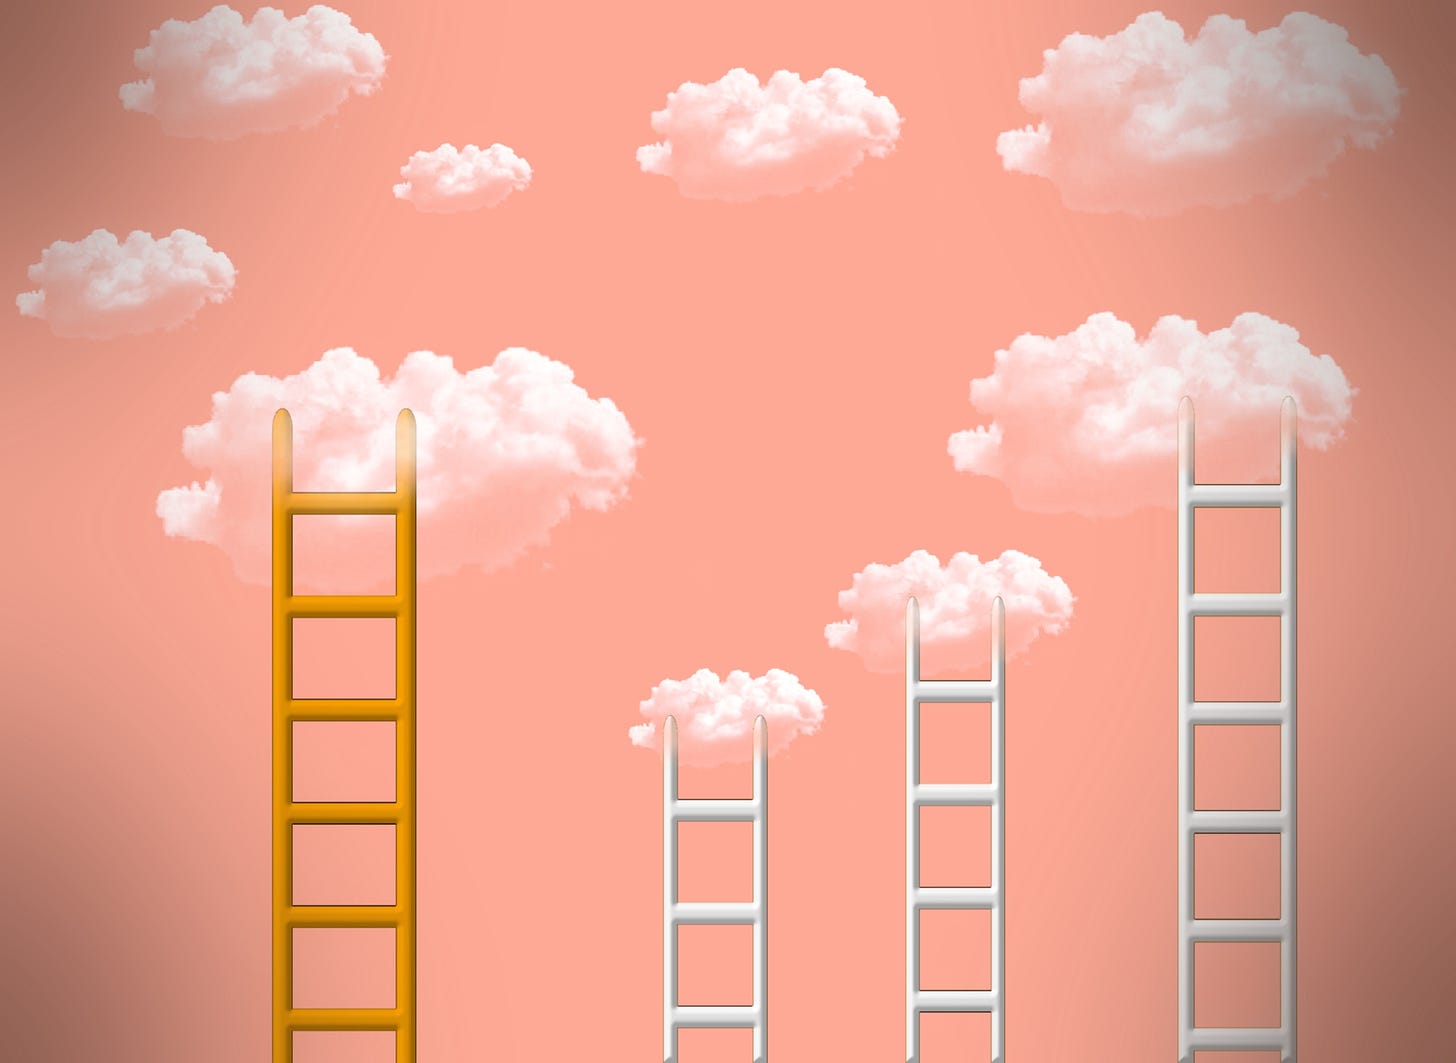 Four ladders, one orange and three white, leading to clouds against a salmon pink background